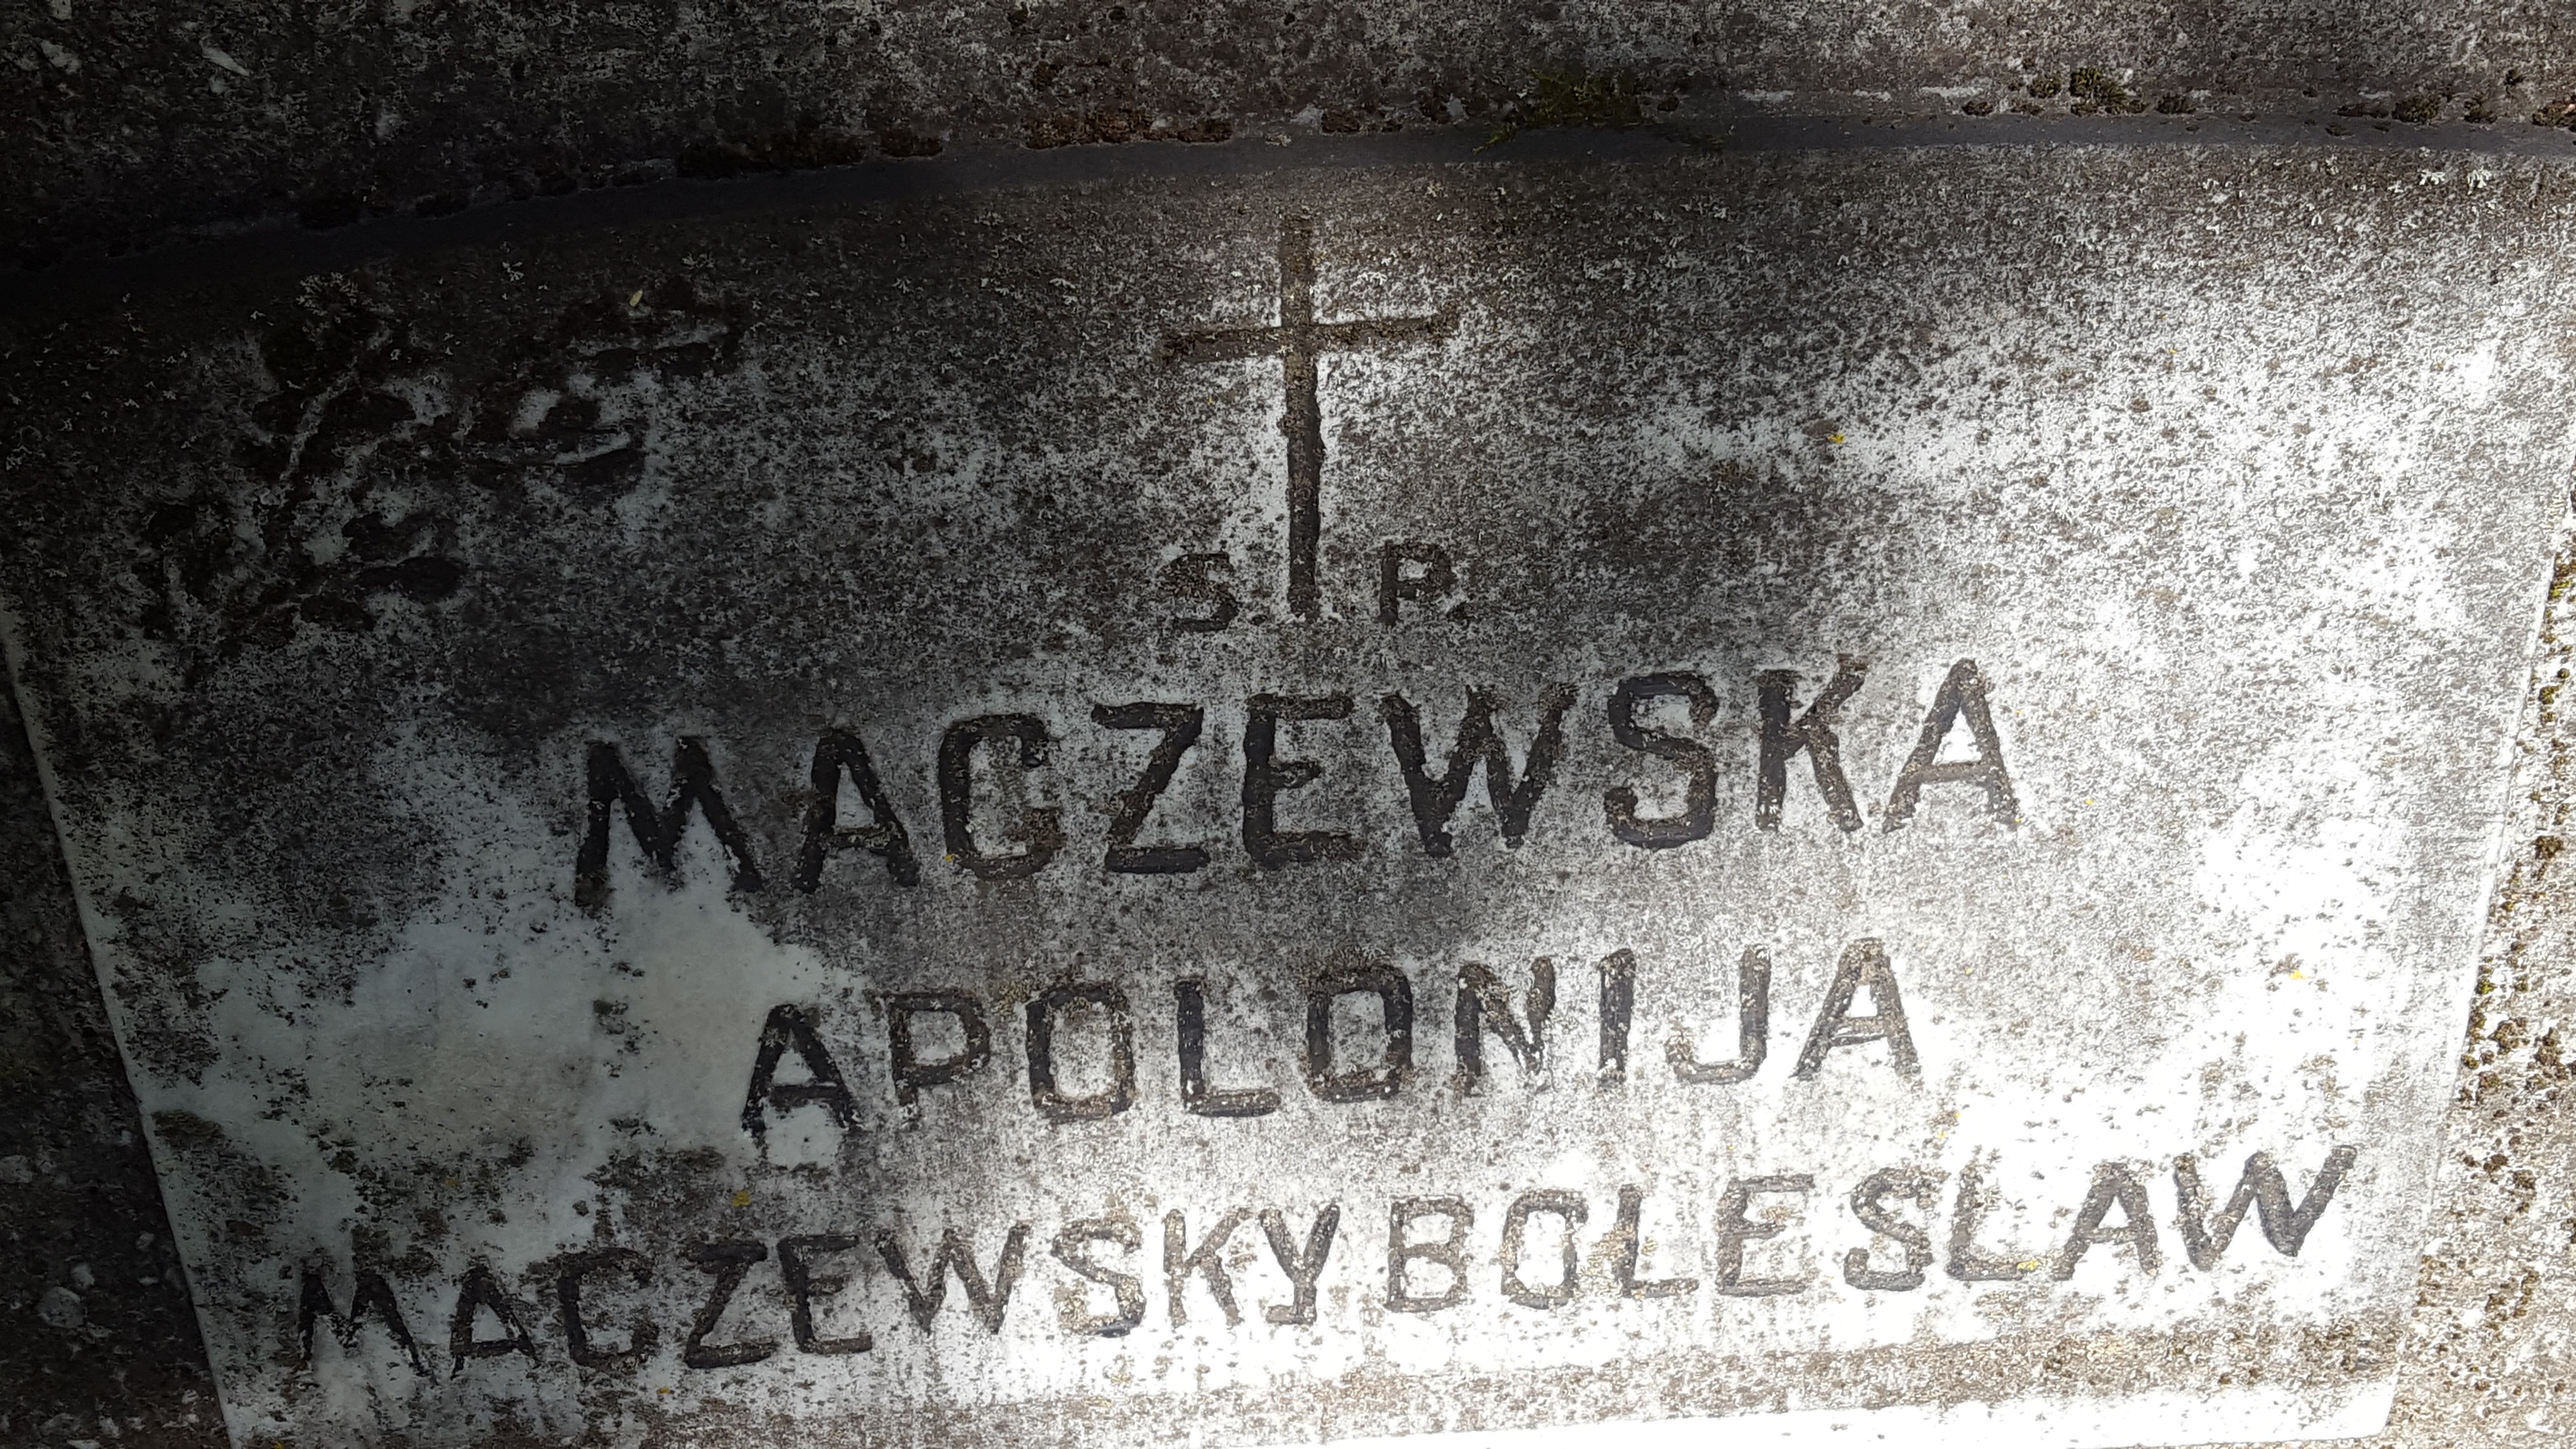 Inscription from the tombstone of Apolonia and Boleslaw Maczewski, St Michael's cemetery in Riga, as of 2021.